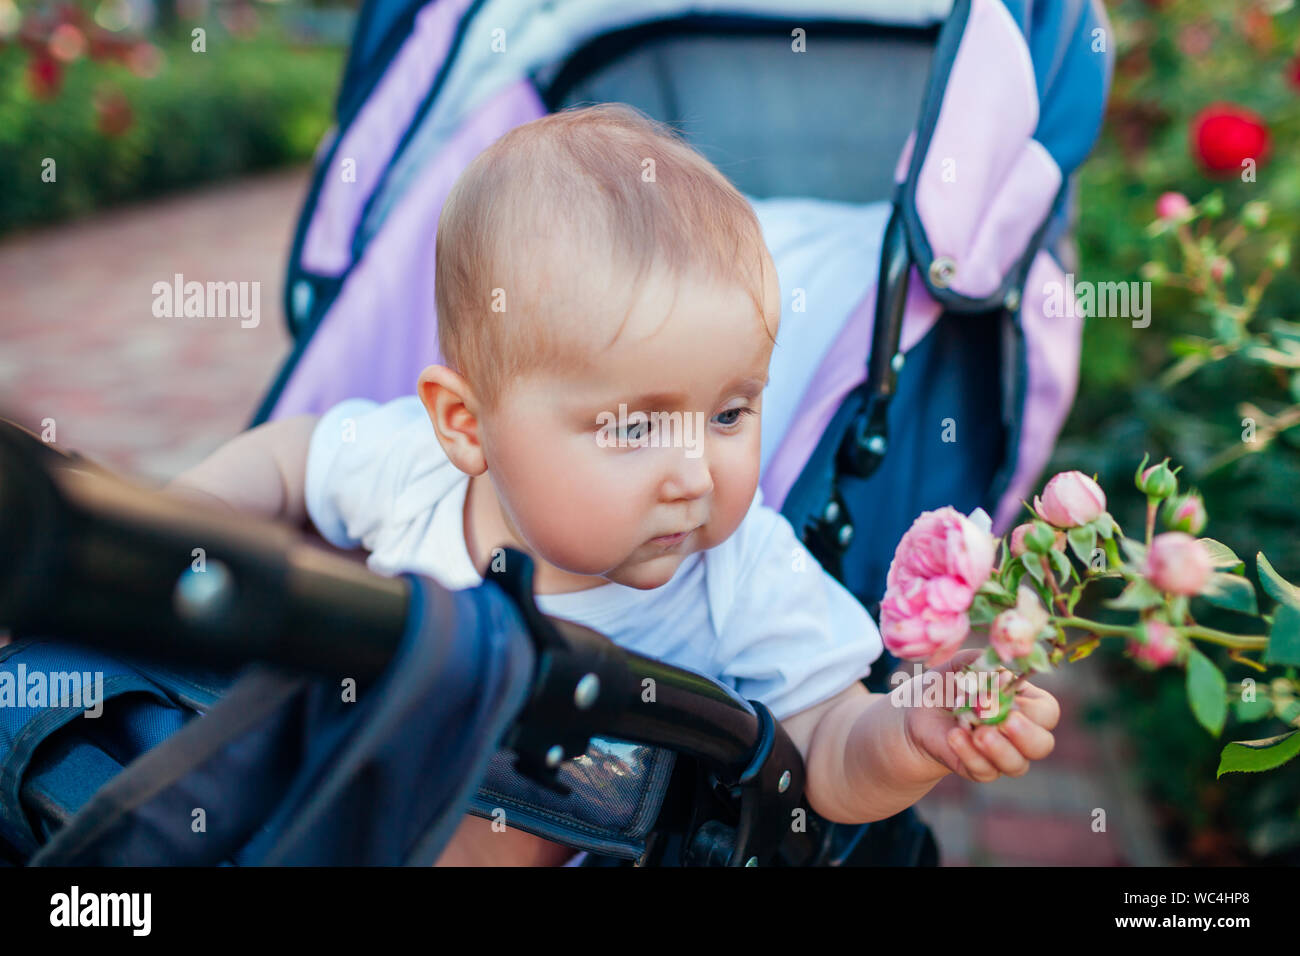 Baby girl sitting in carriage and touching roses in garden. Infant exploring world of nature outdoors. Curious kid Stock Photo